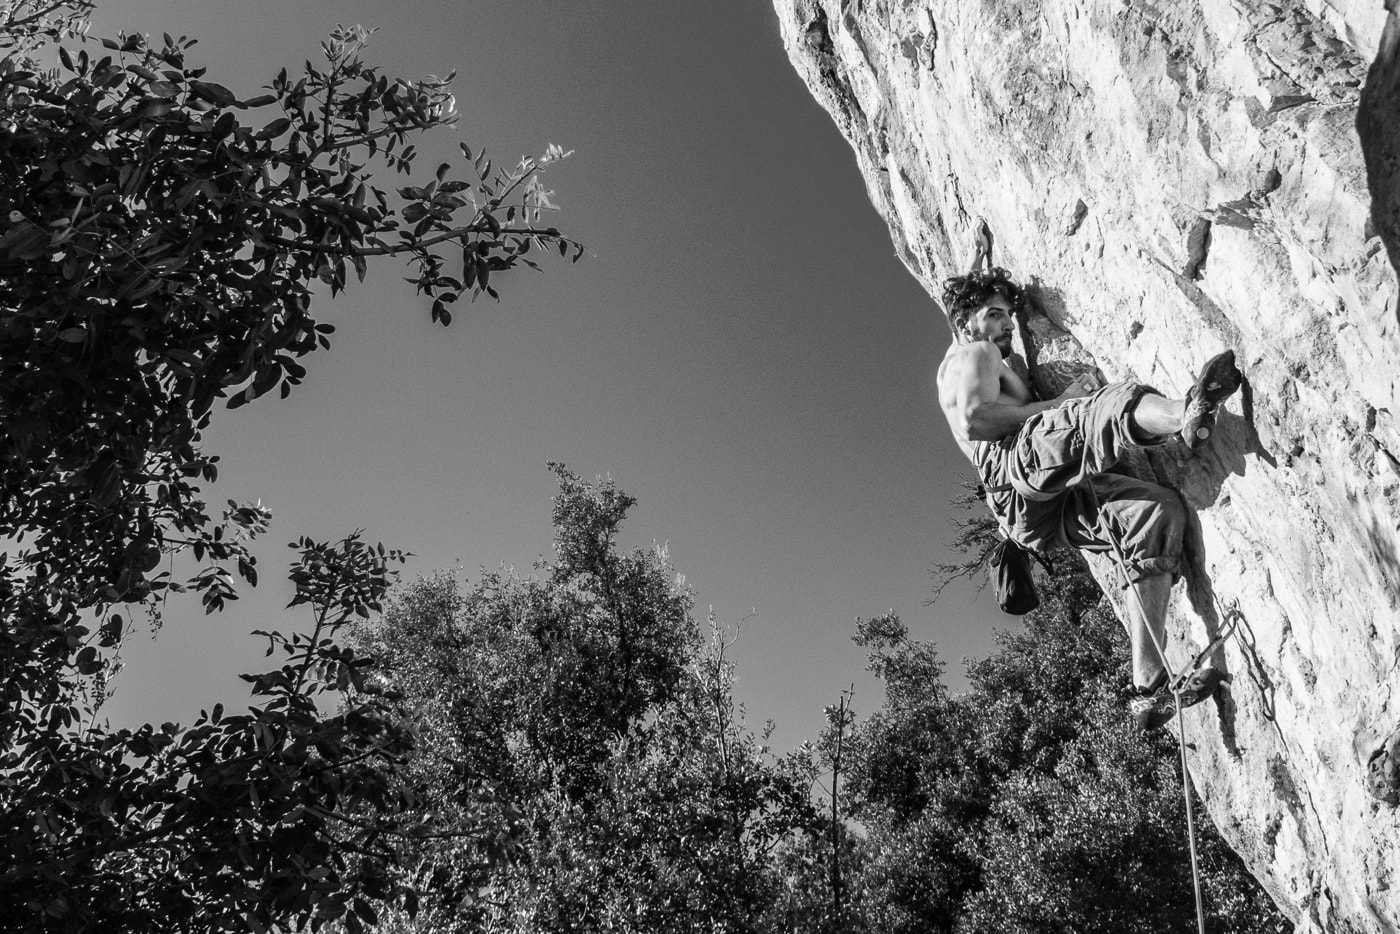 Rock Climbing Gear Guide: Best Harnesses for Men and Women